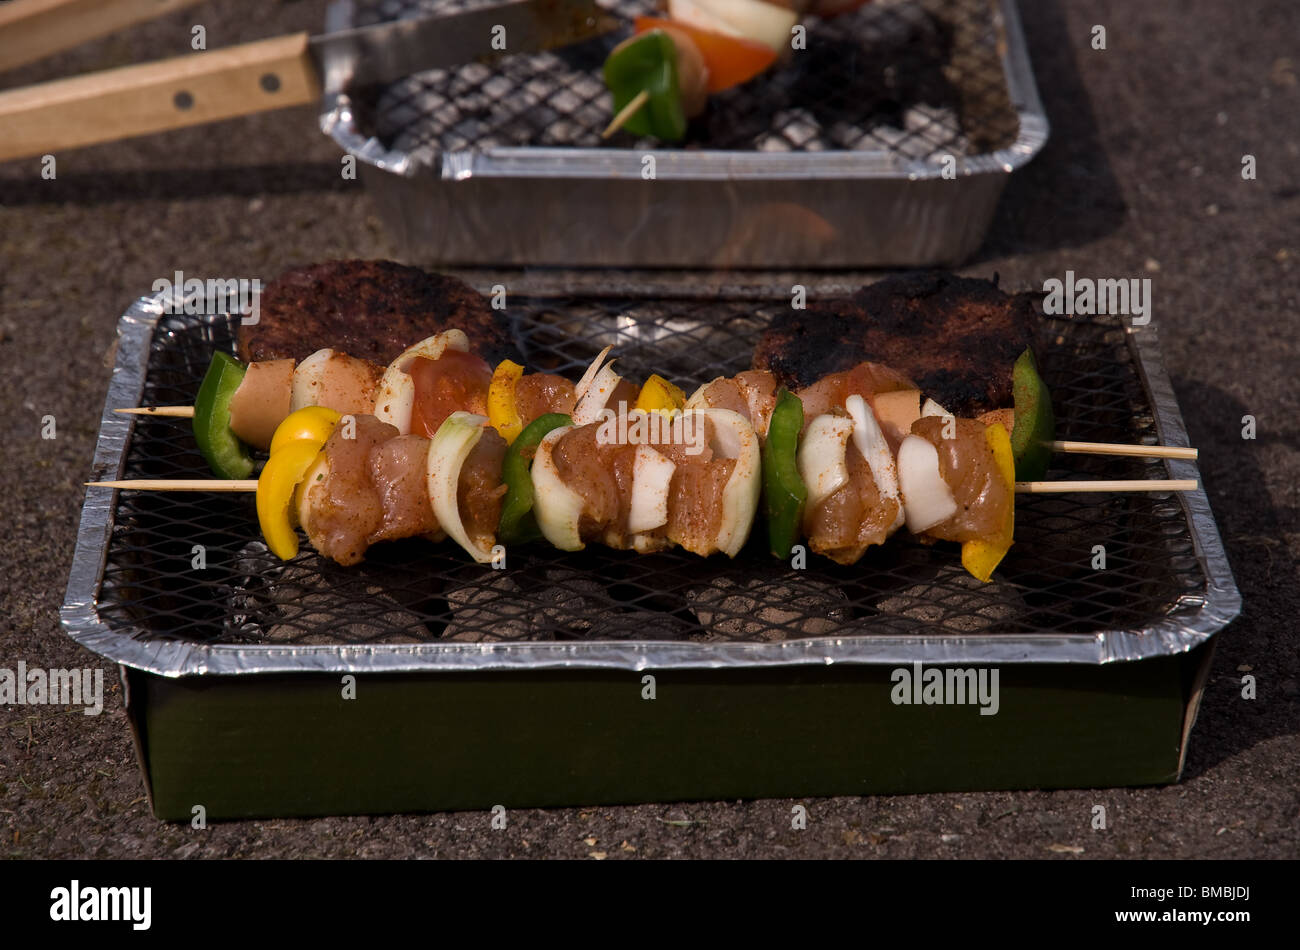 Barbecue on location, shashlik, barbecue meal Stock Photo